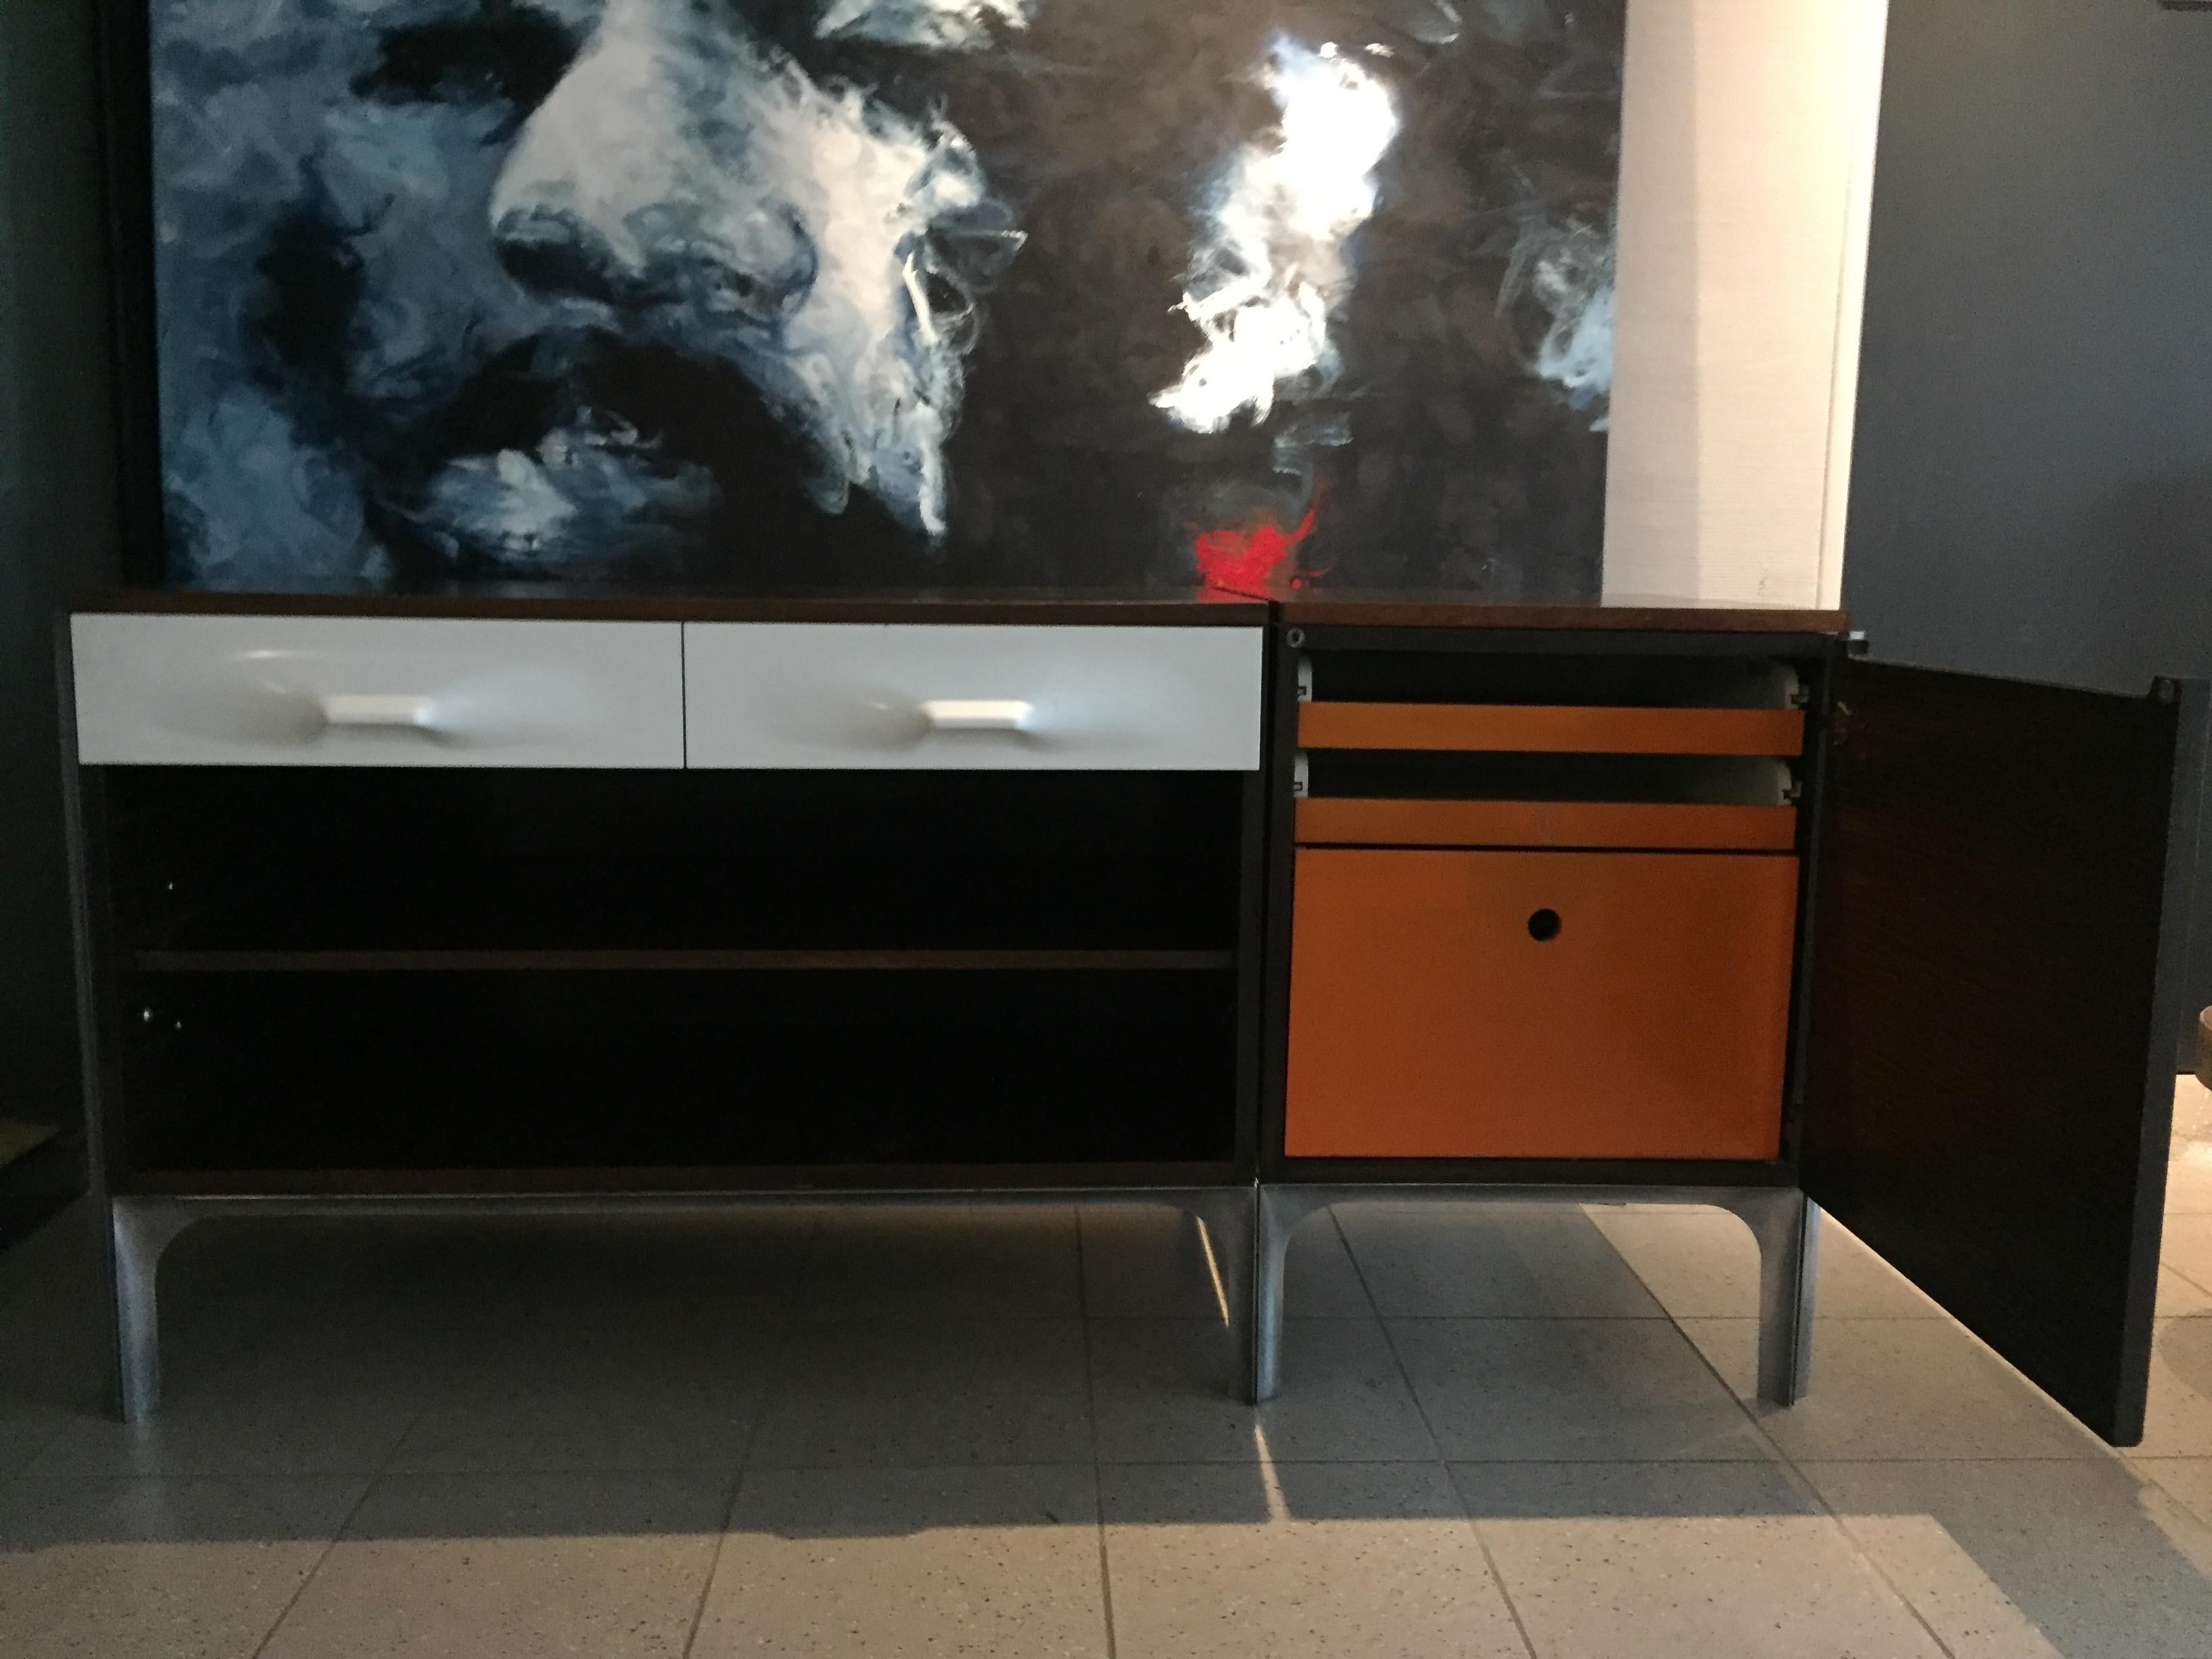 Raymond LOEWY DF2000
Desk sliding tray and its box
Edition Doubinsky brothers 1965 very good condition
Dimension 155cm x 56 x 78.
Body in rosewood veneer, frame formed of aluminum angles, sliding tray with two fake drawers in white lacquered ABS